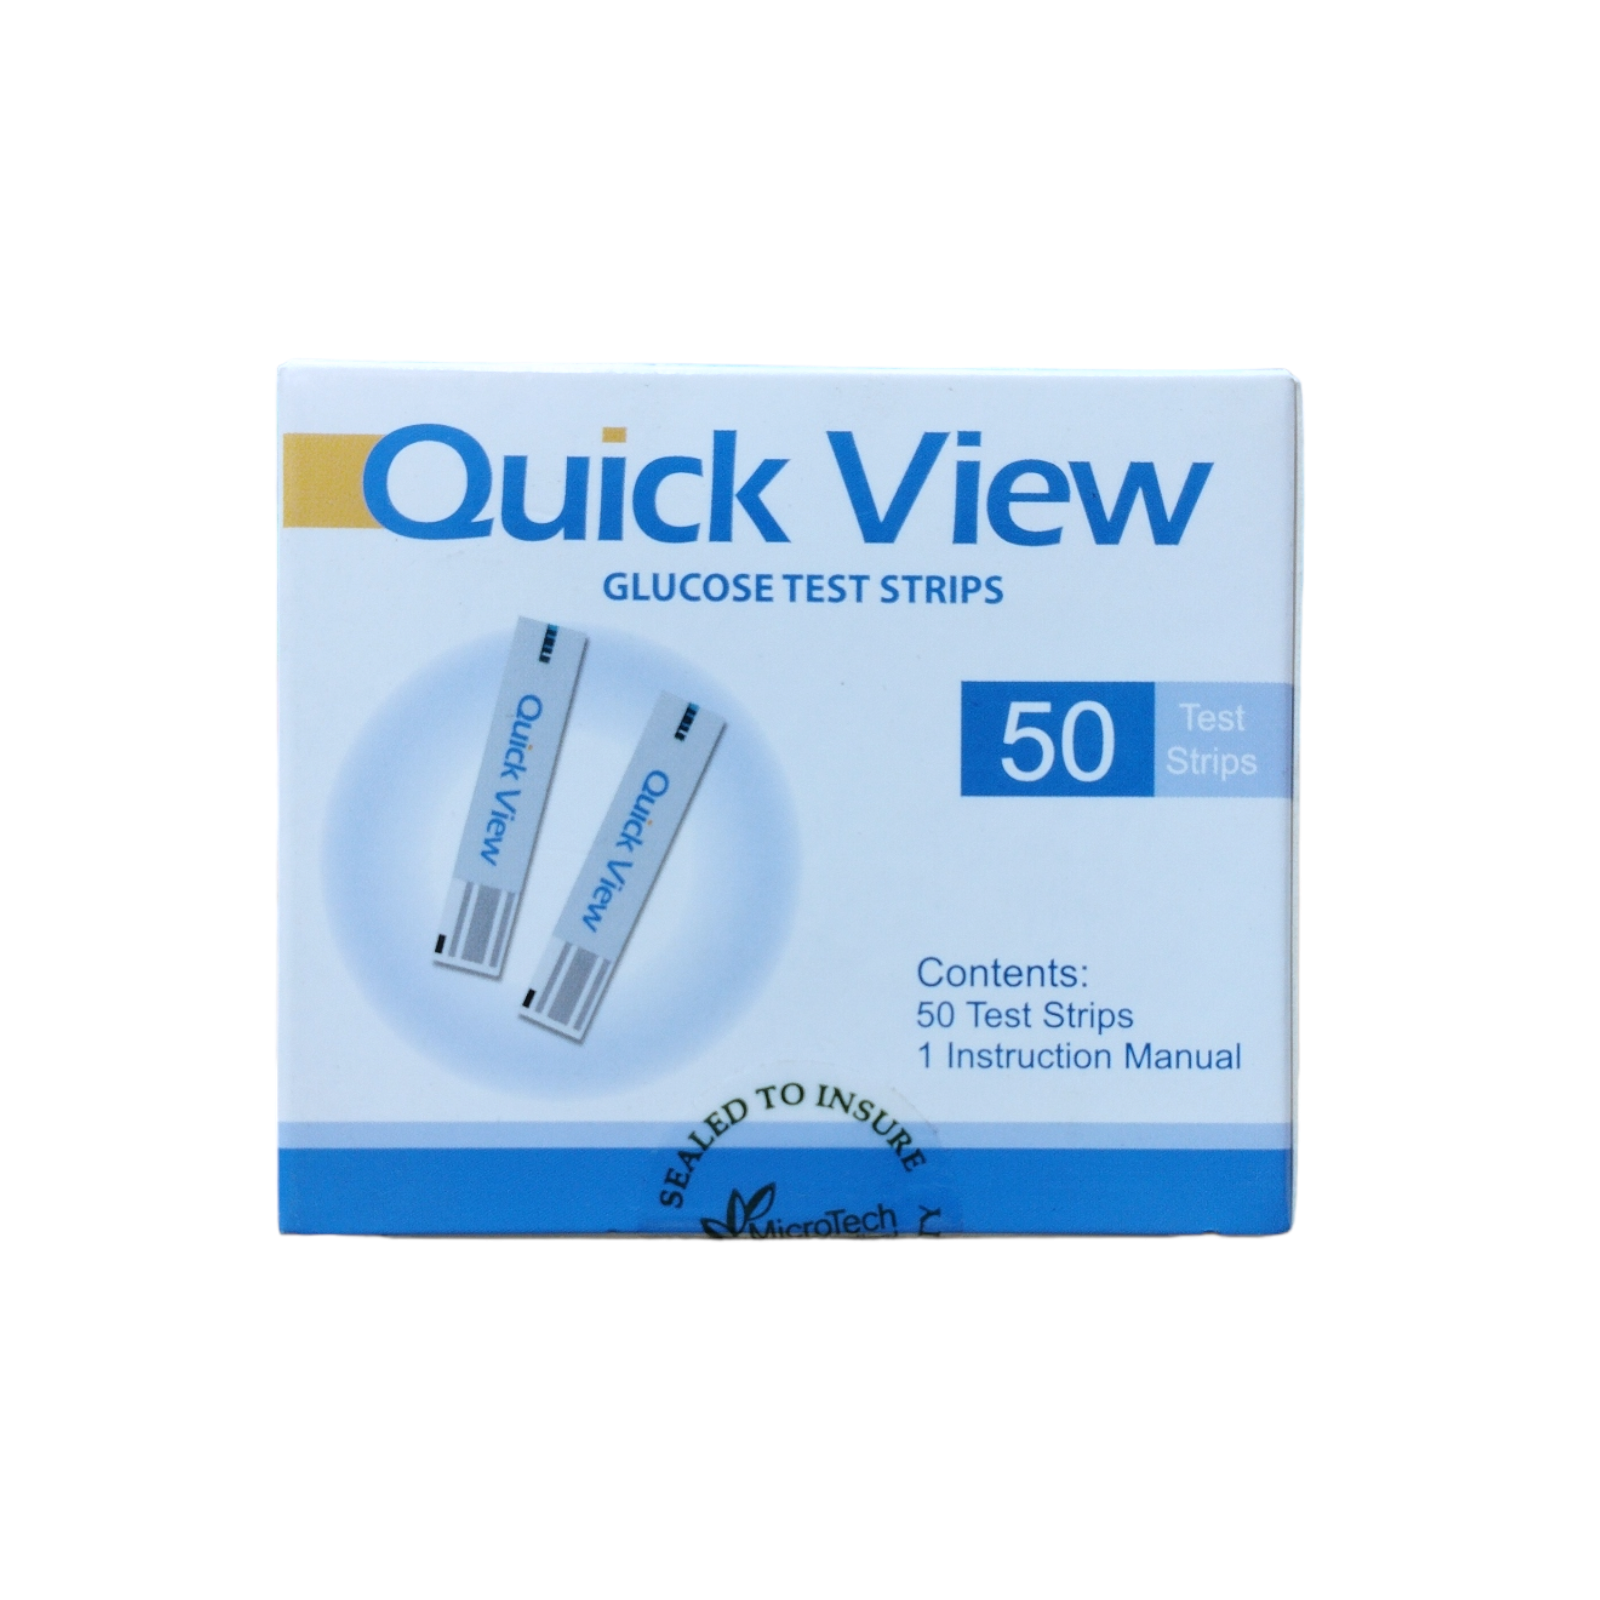 Quick View Blood Glucose Test Strips